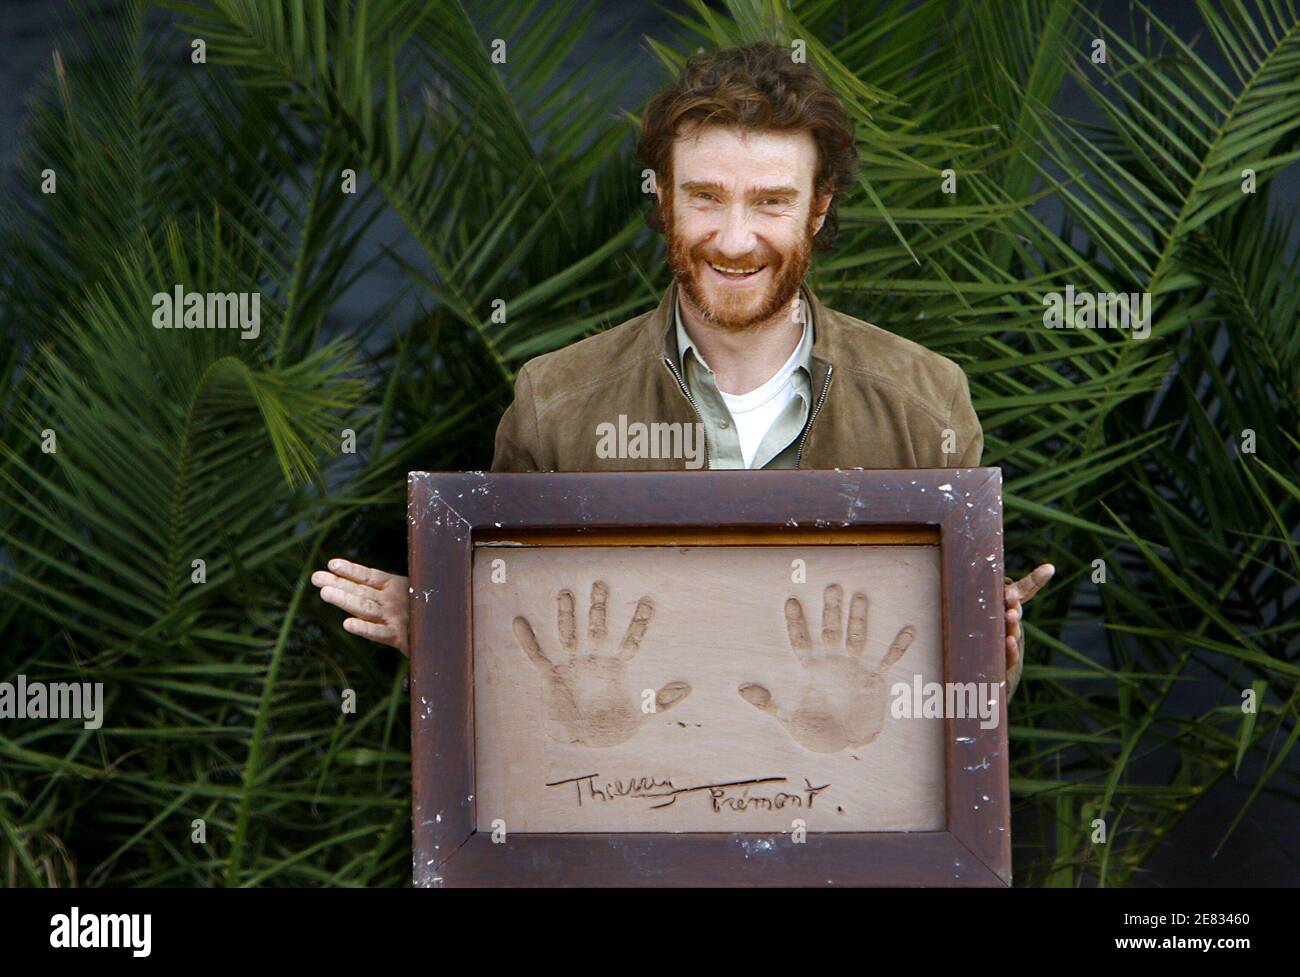 French actor Thierry Fremont poses with his handprints in the clay during the '25th Festival du Film Policier' (Mystery Film) in Cognac, France, on June 24, 2007. Photo by Patrick Bernard/ABACAPRESS.COM Stock Photo